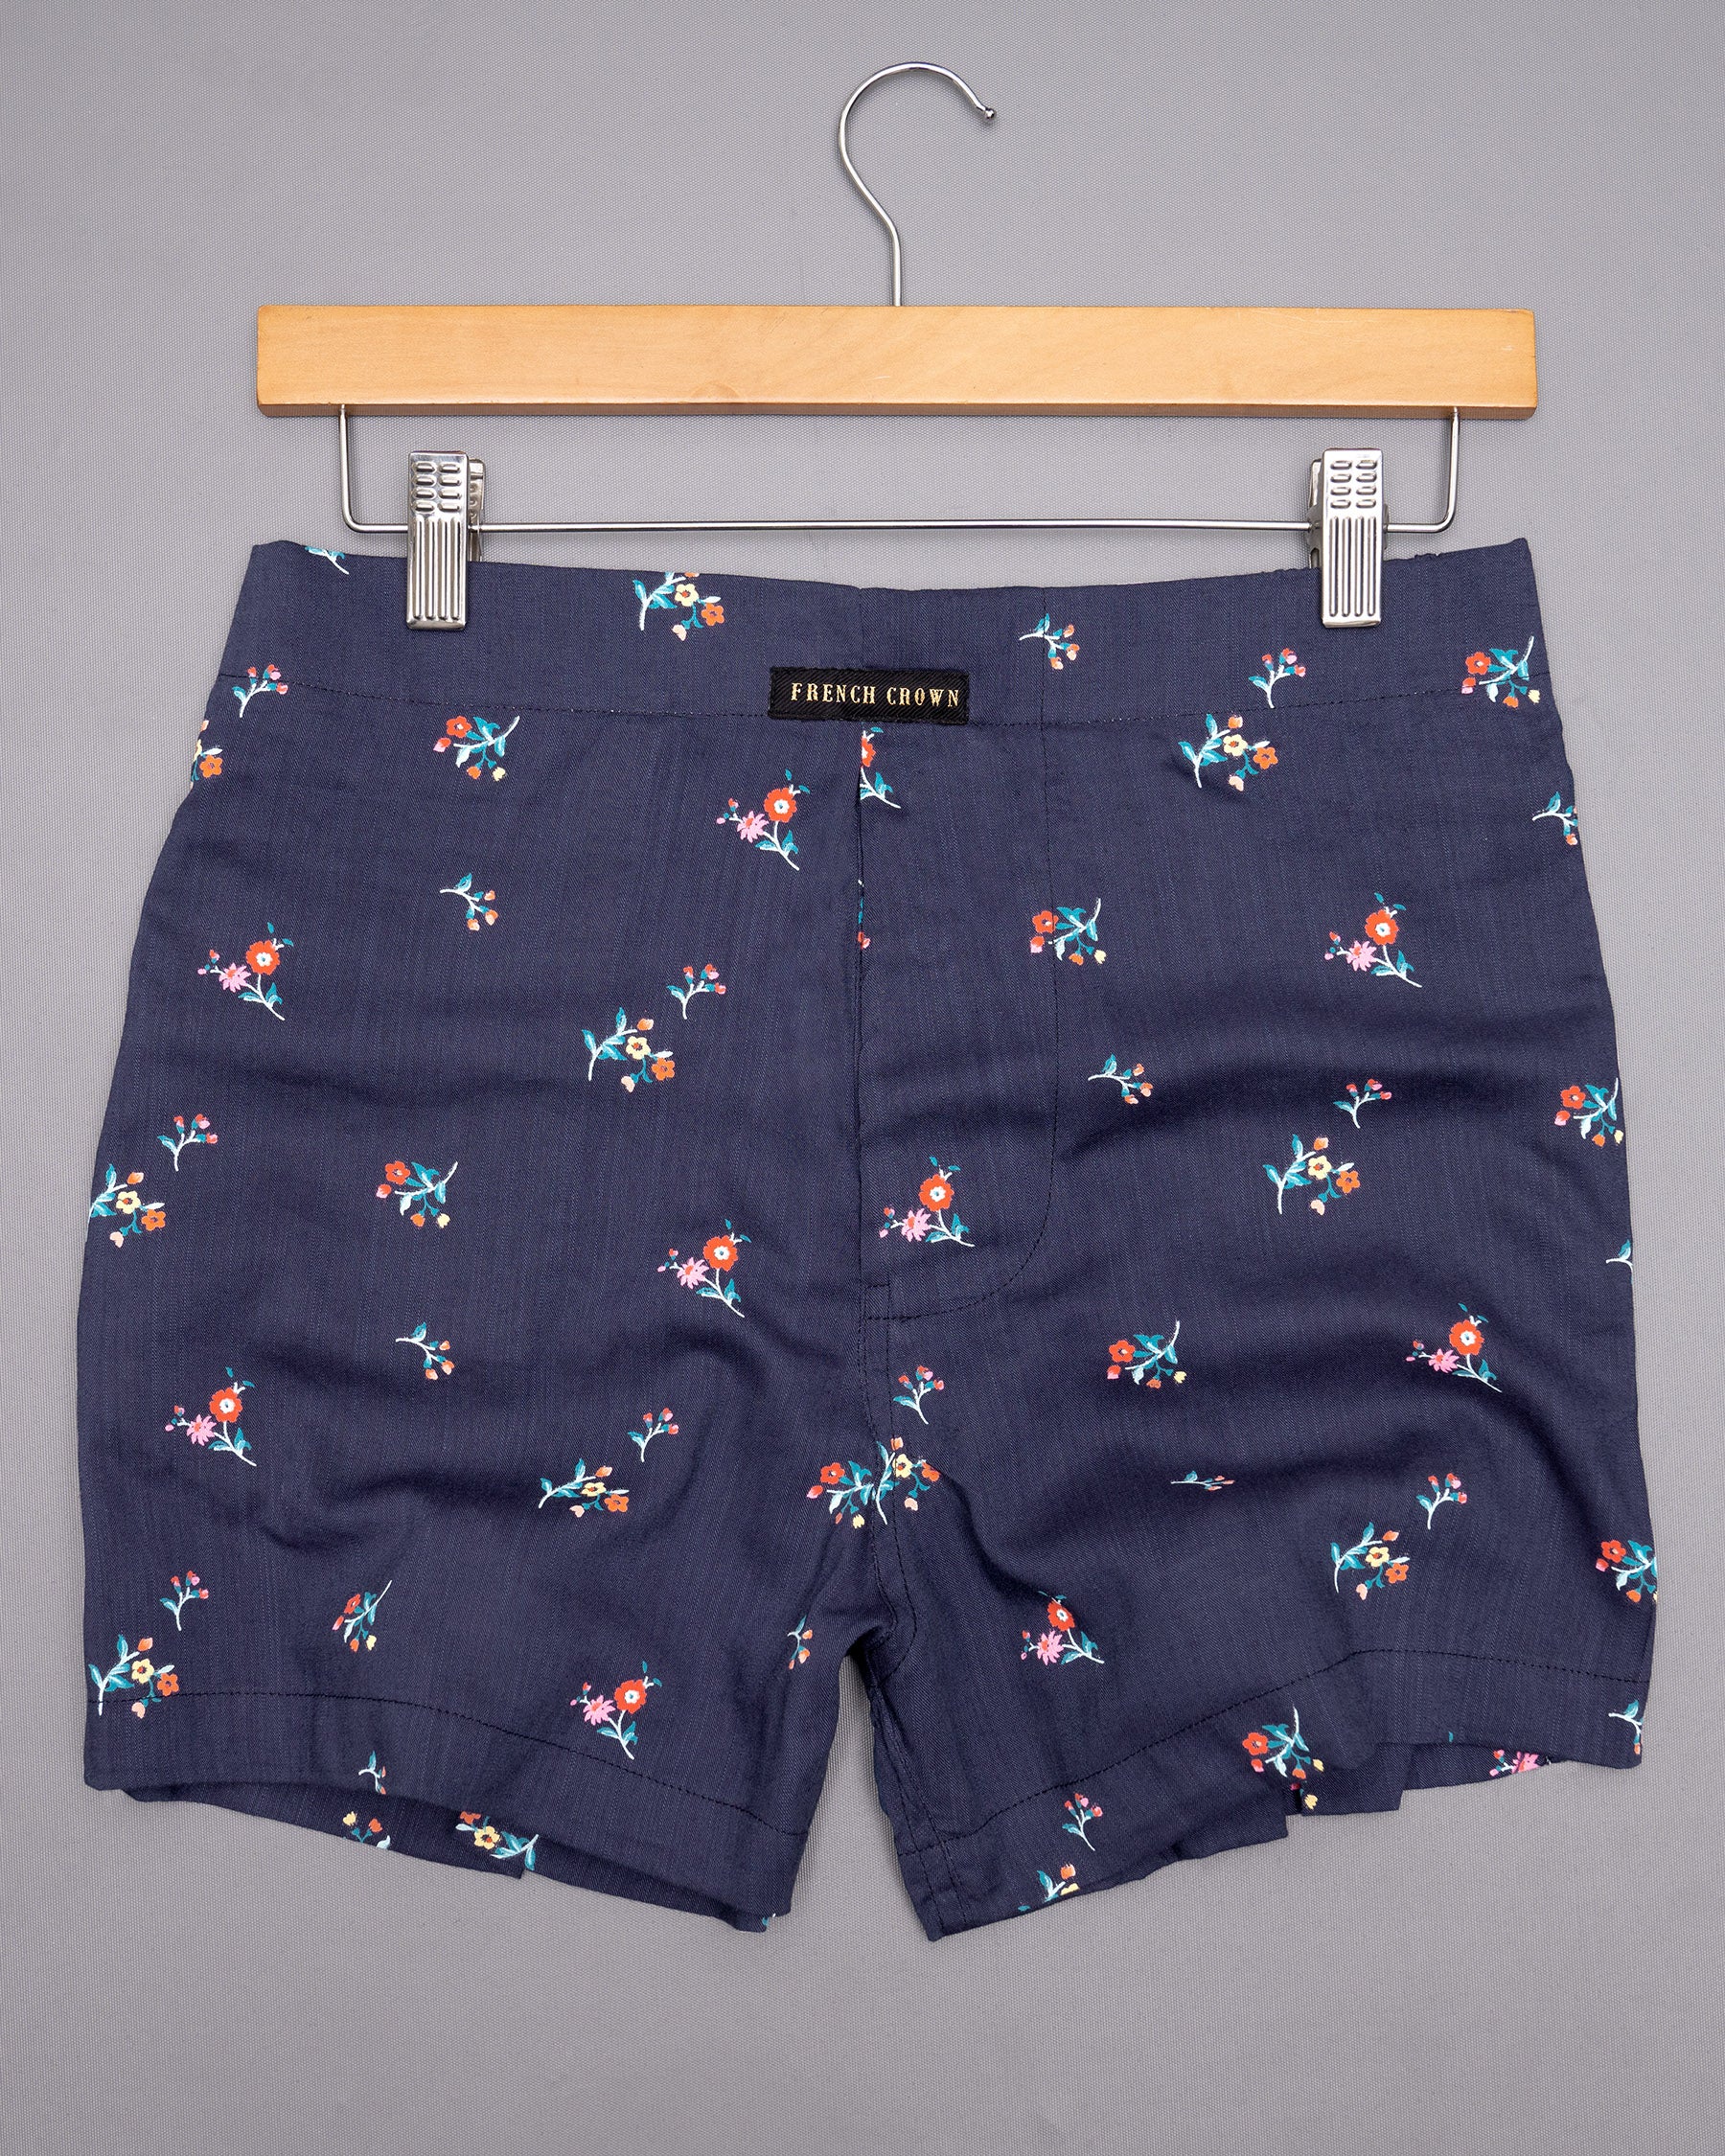 Rouge Pink and Haiti Blue Flowery Printed Tencel Boxers BX369-28, BX369-30, BX369-32, BX369-34, BX369-36, BX369-38, BX369-40, BX369-42, BX369-44